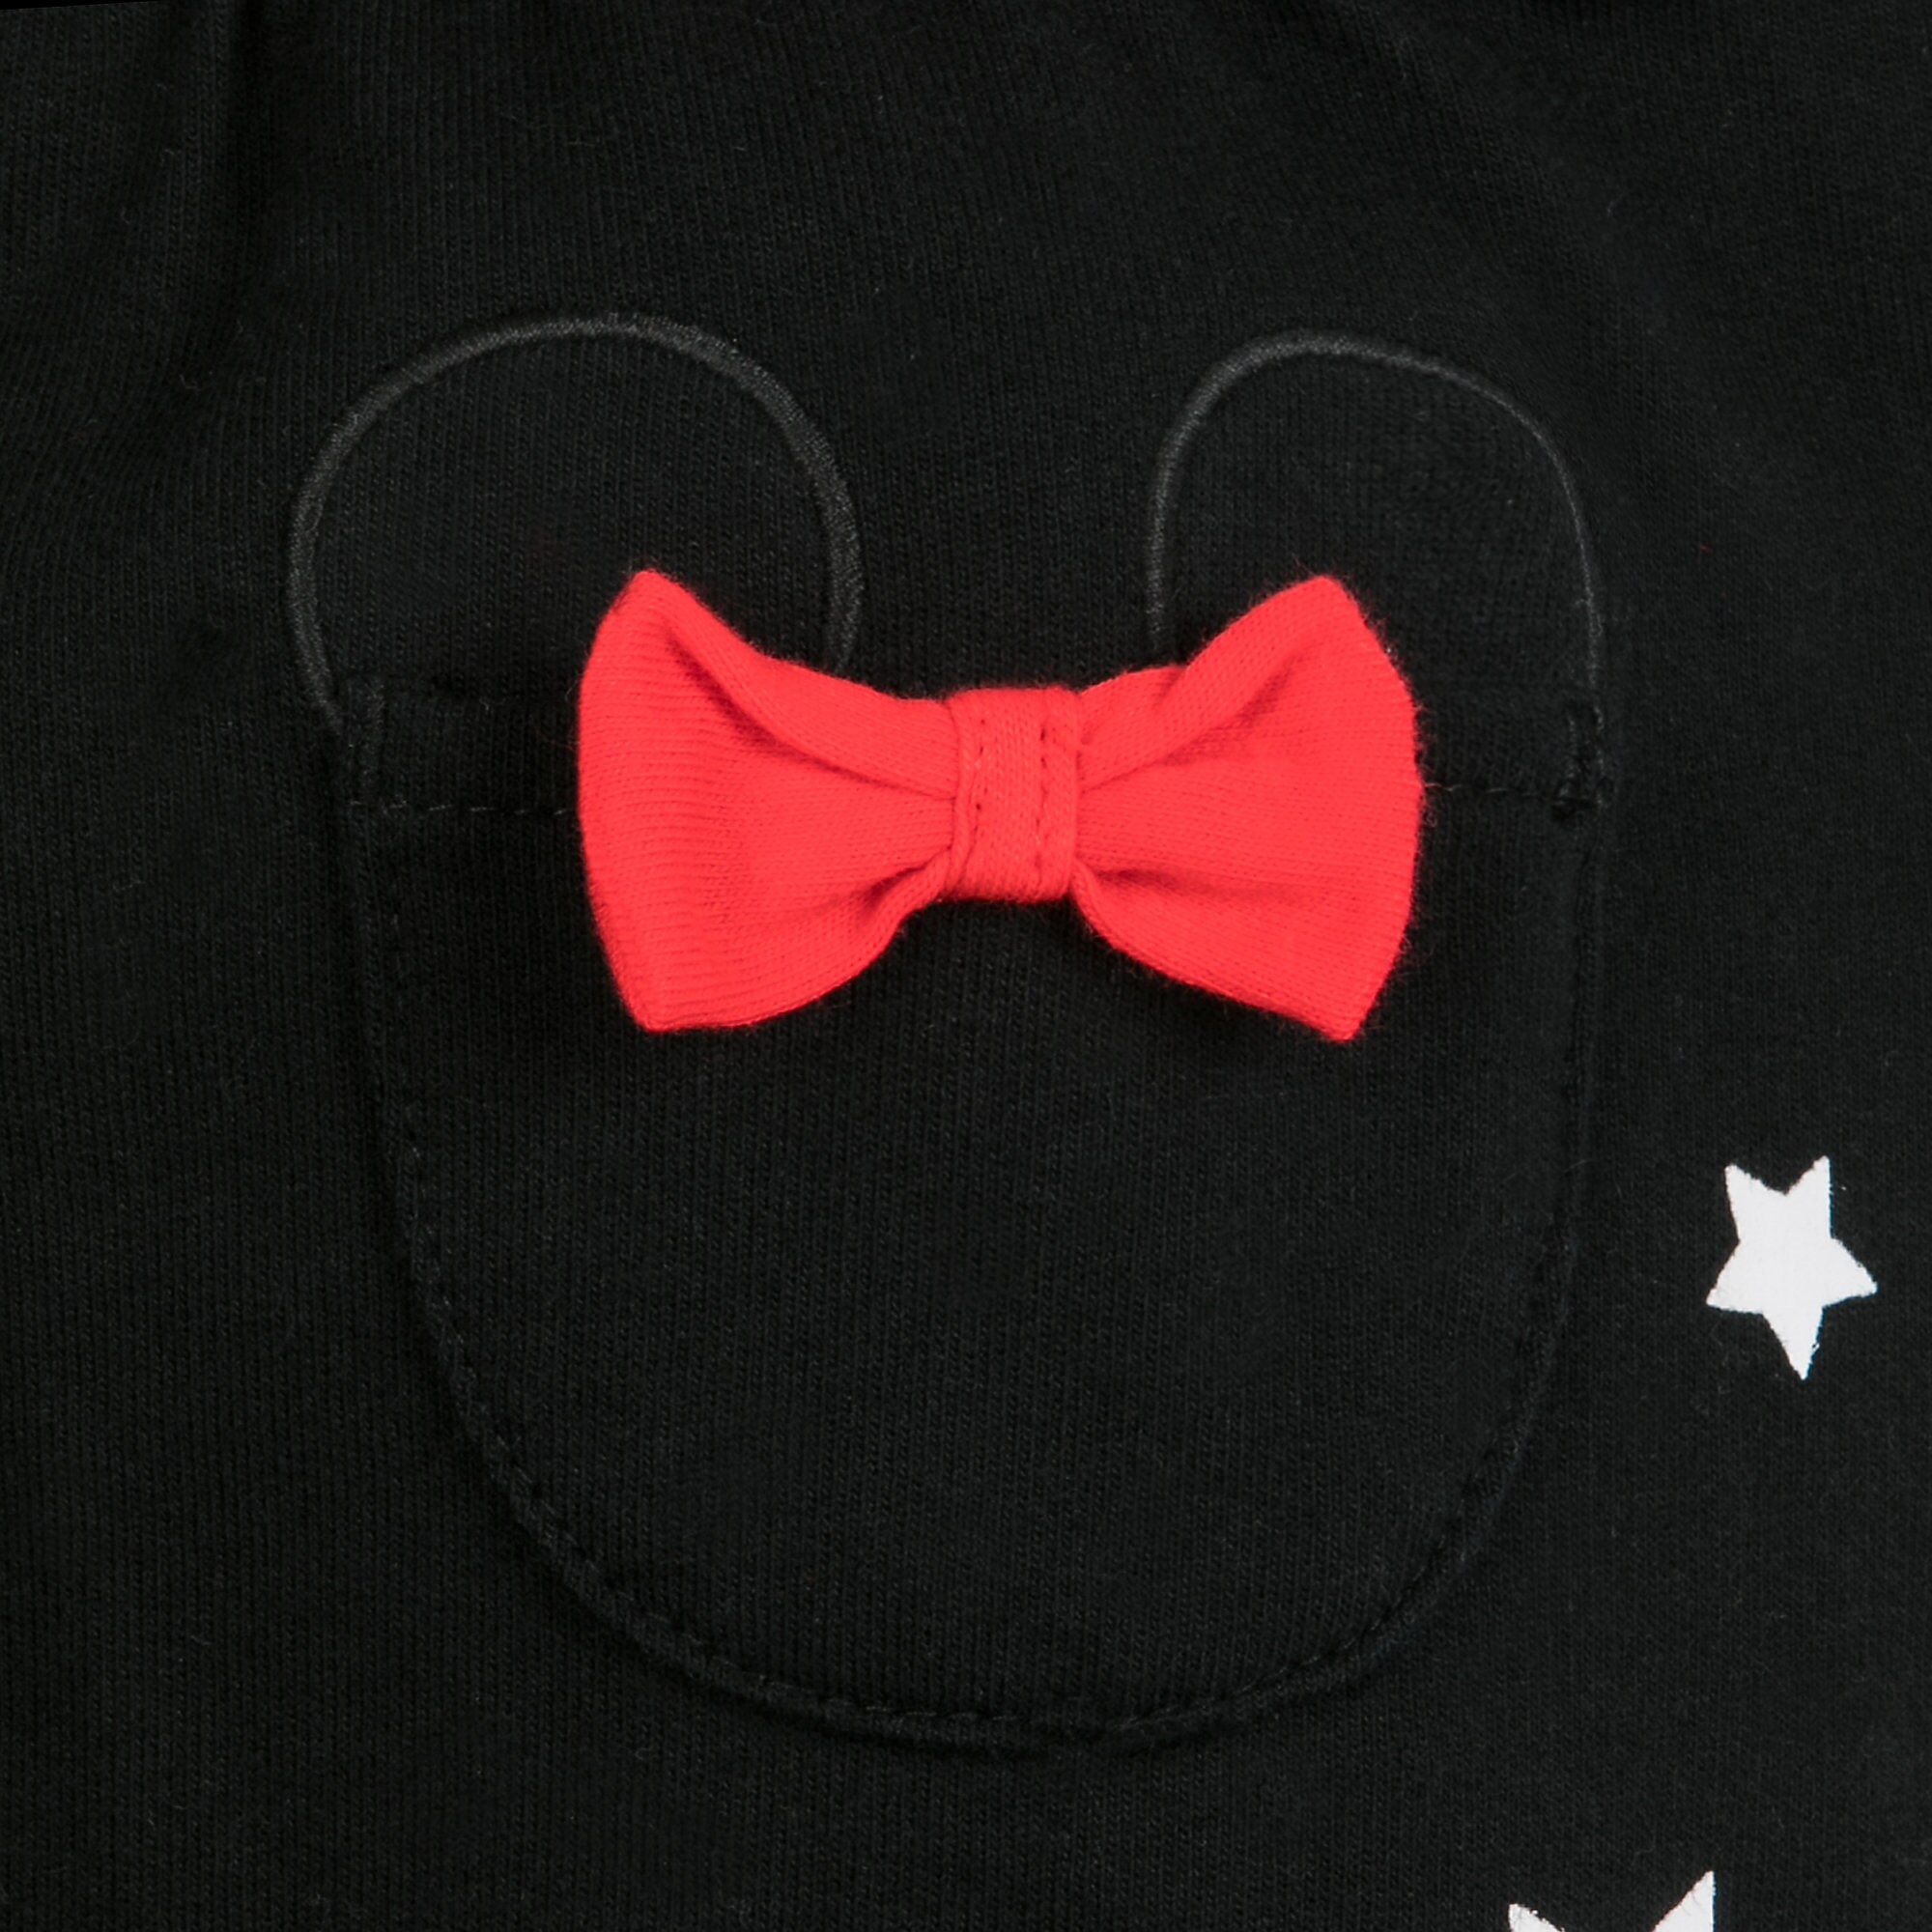 Minnie Mouse Dungaree Set for Baby